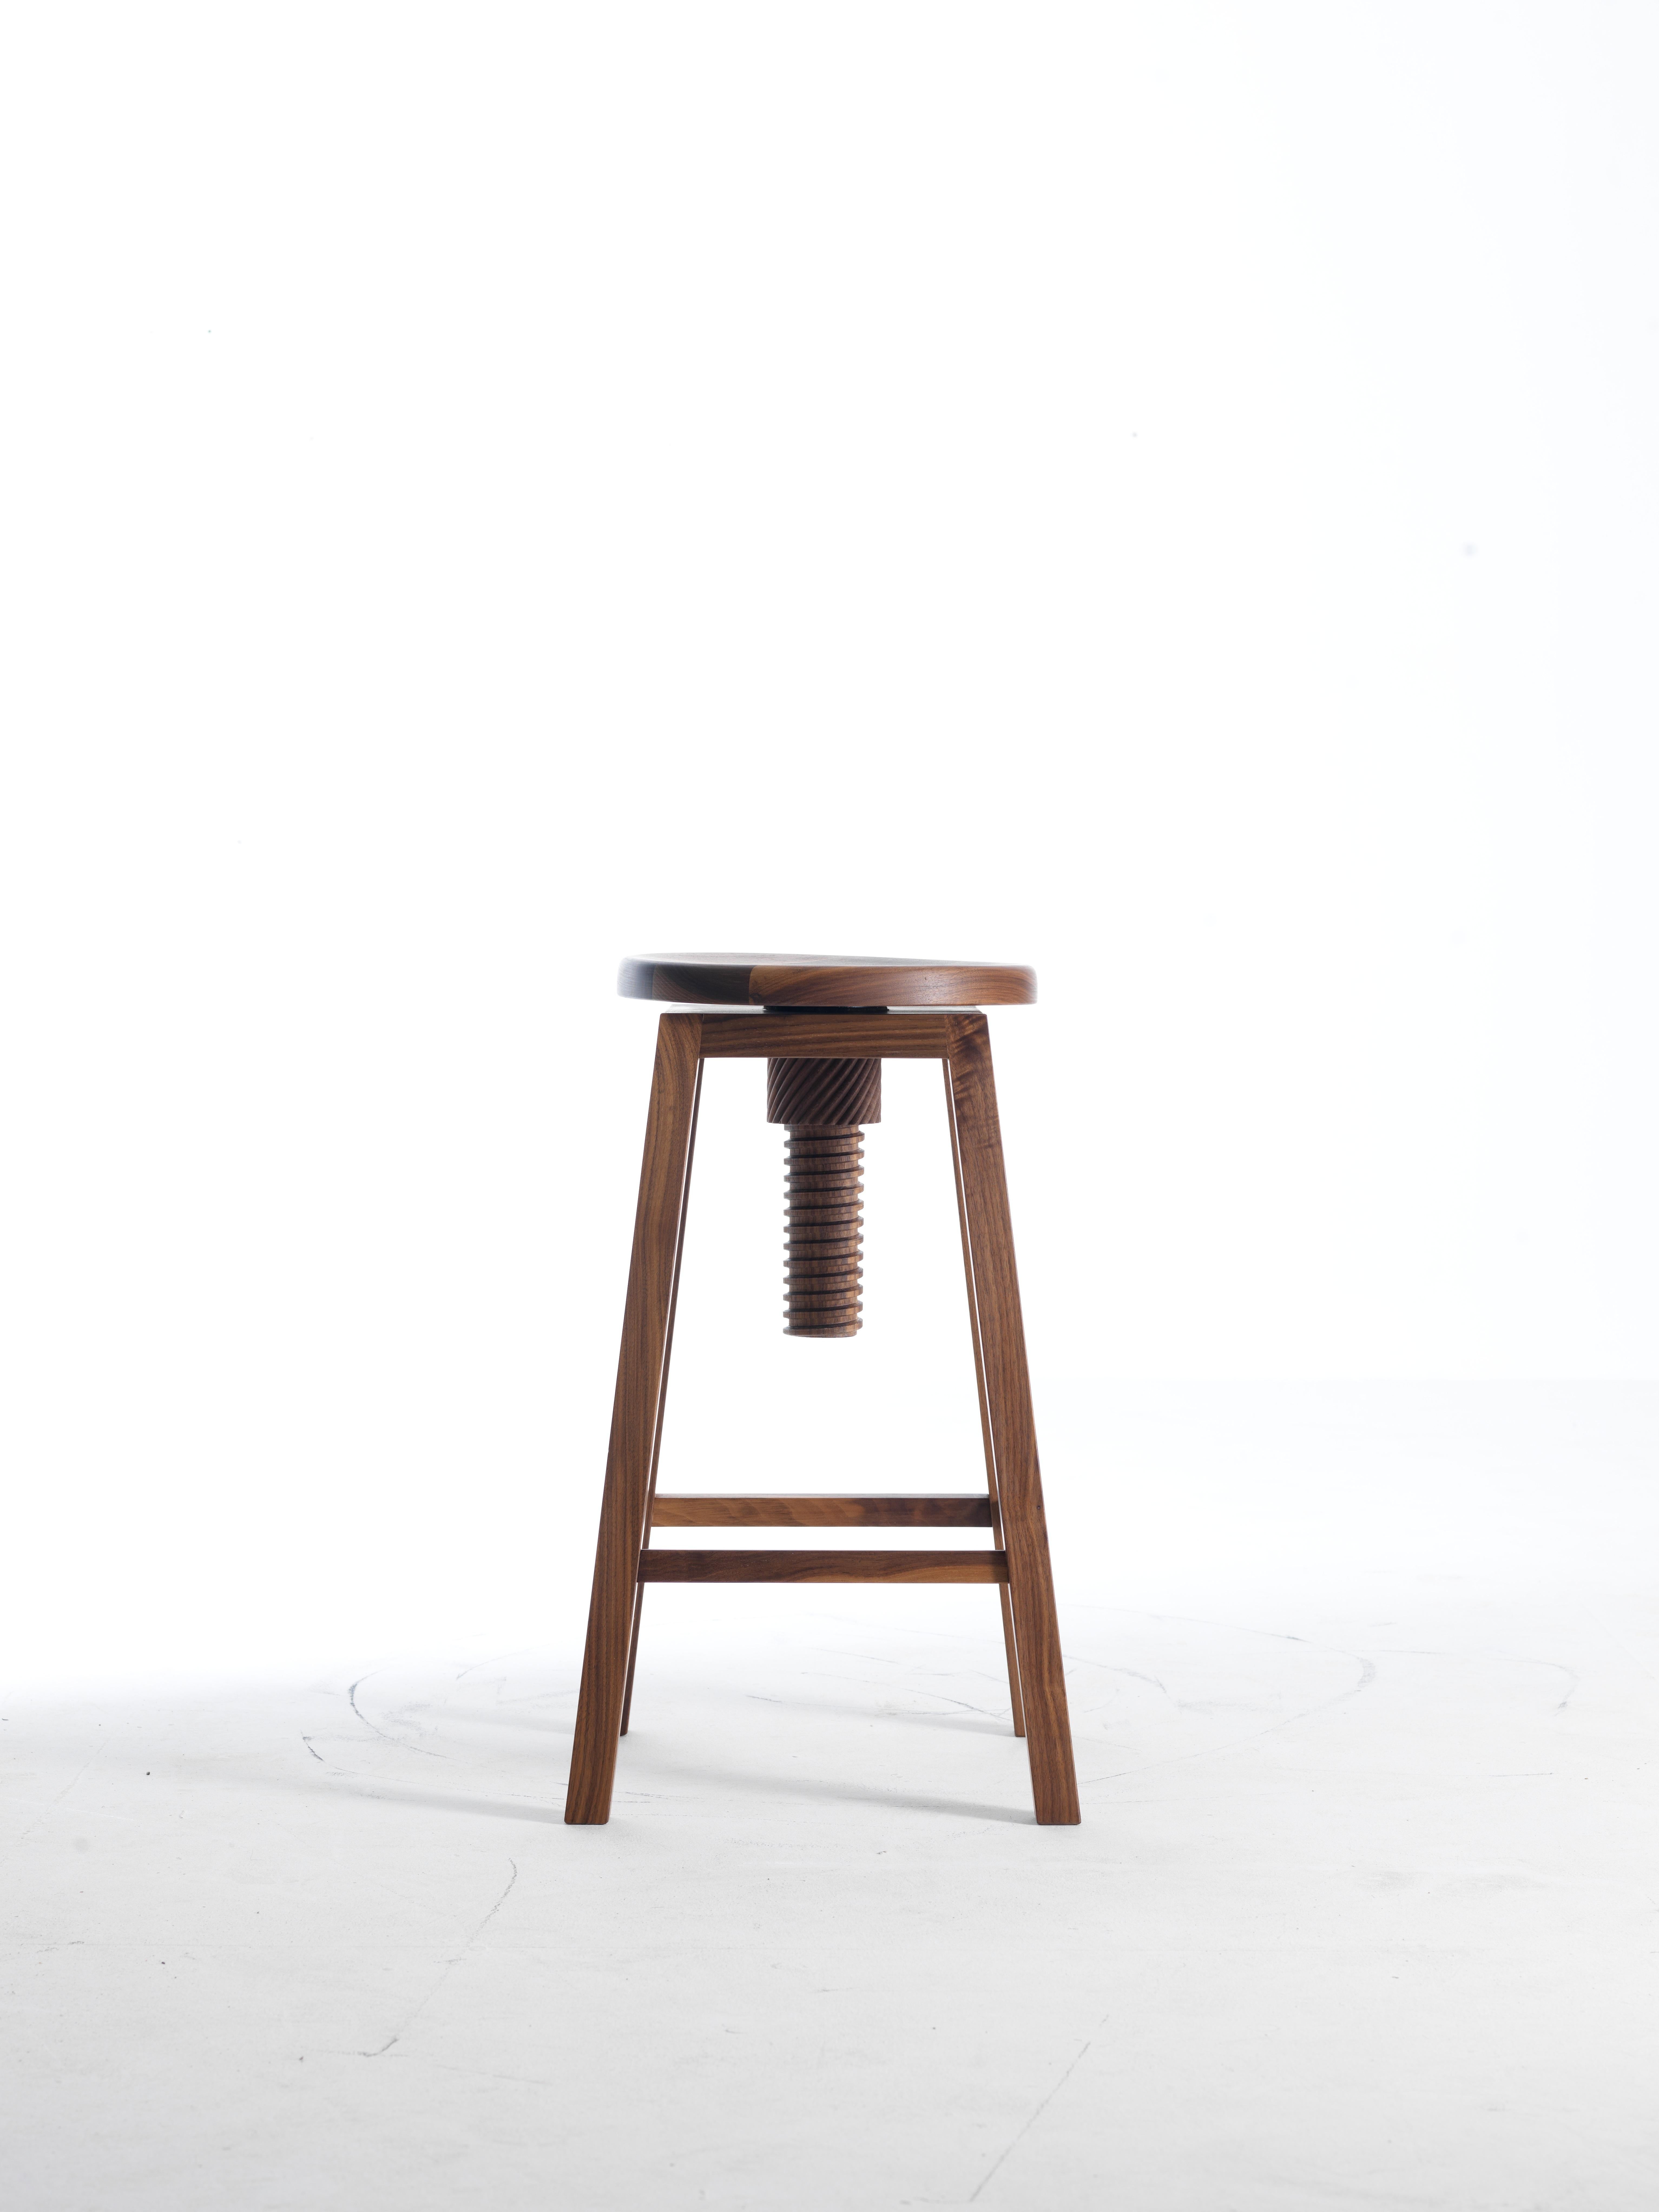 A simple and refined design in which solid walnut finds its highest expression. The Invito solid wood stool combines timeless style with authentic and natural beauty. Contemporary and yet classic, it is suitable for any interior. From the structure